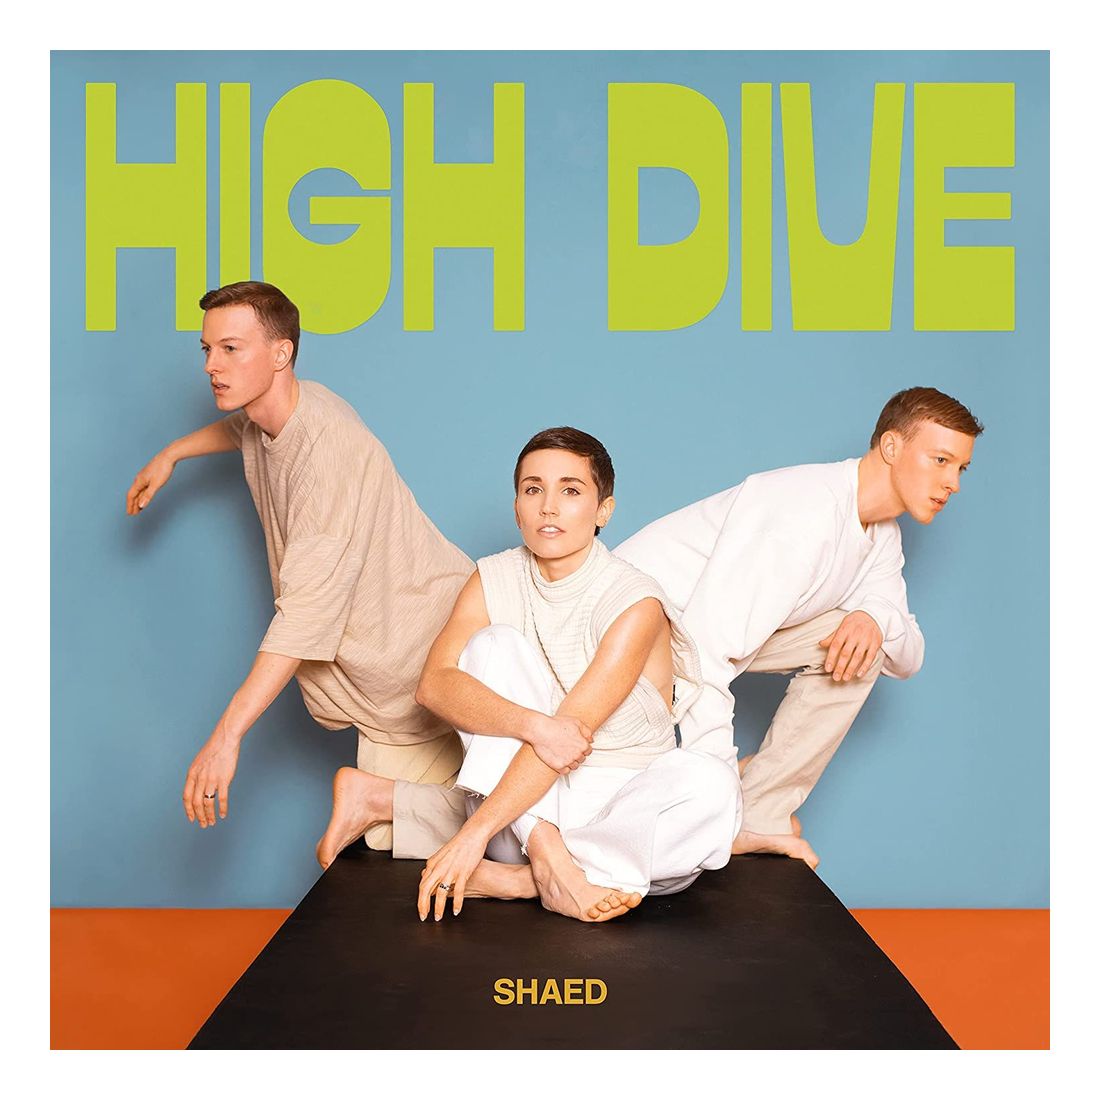 CD диск High Dive | Shaed компакт диски photo finish records shaed high dive cd